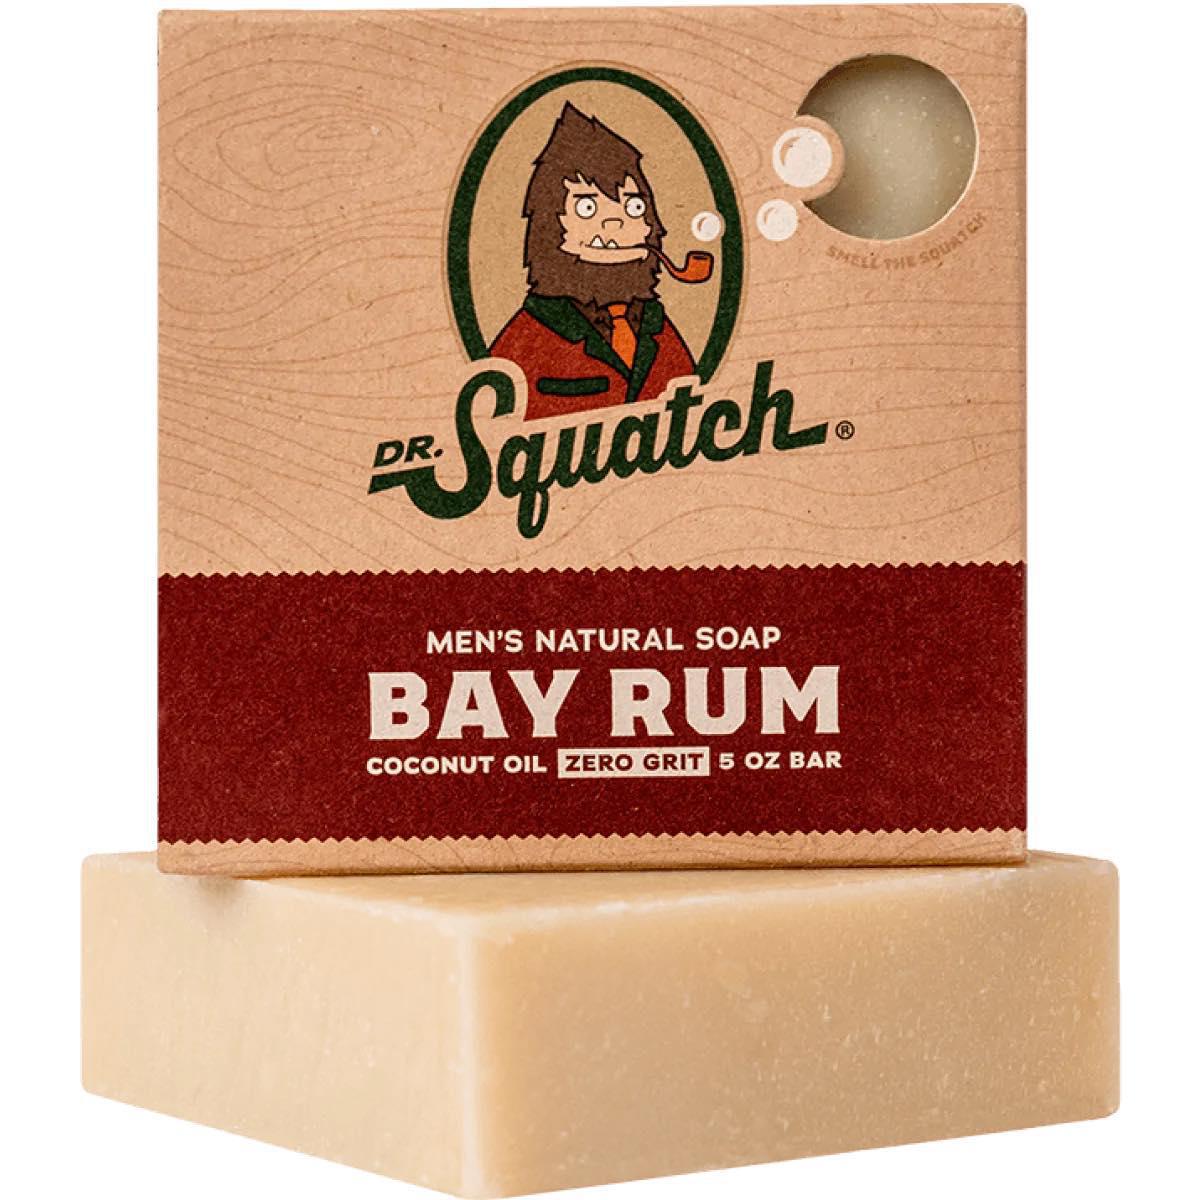 Dr. Squatch 3-Pack Coconut Castaway FREE SHIPPING